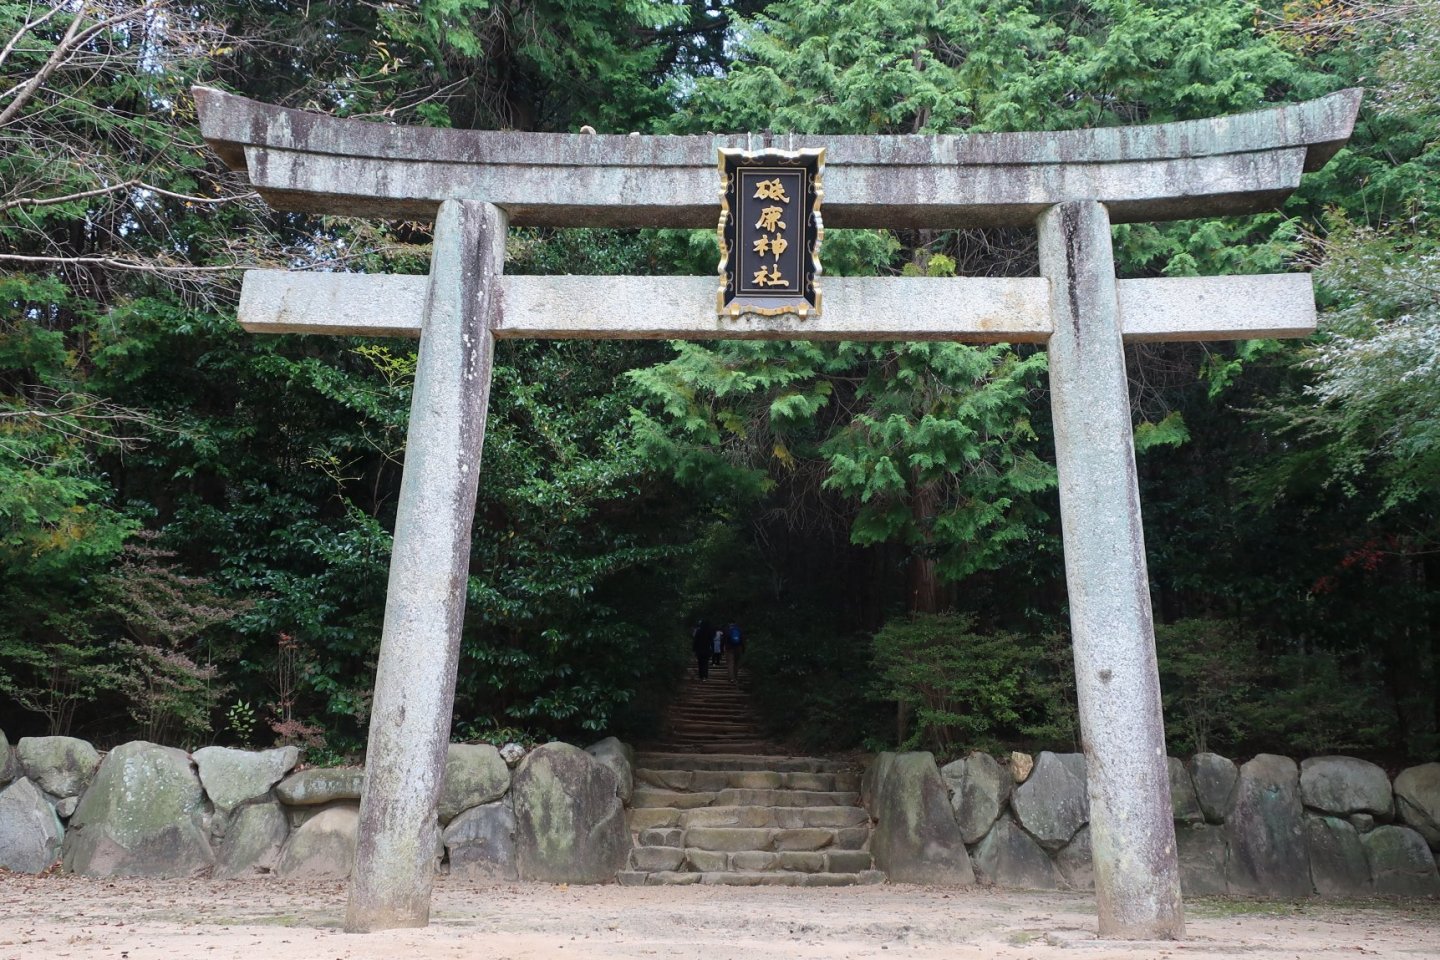 At the entrance is a huge torii gate